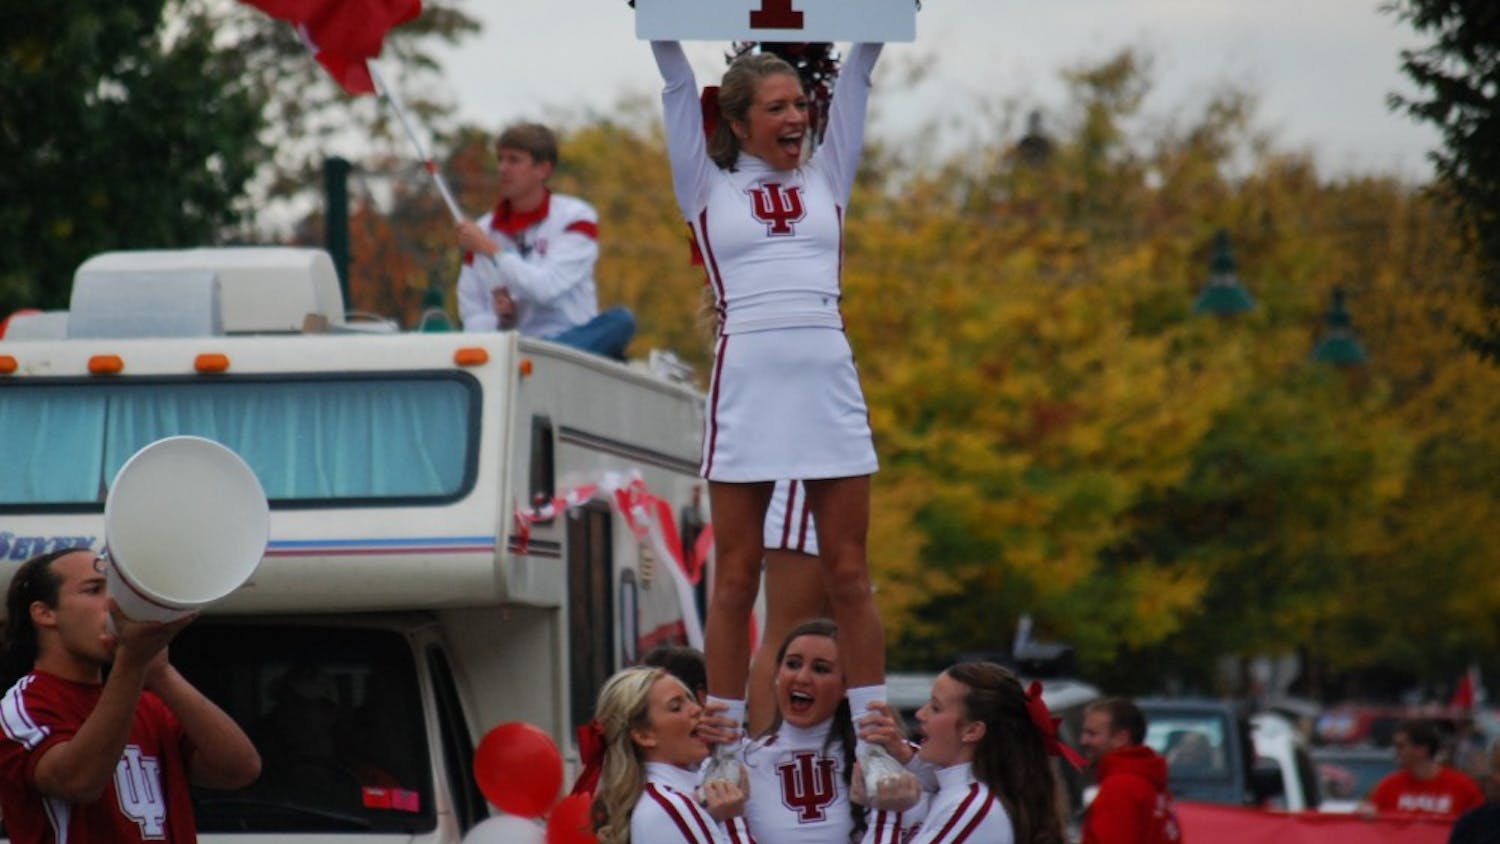 The IU Cheerleaders stop on Kirkwood to get the crowd spirit up. The parade concluded at Sample Gates with a pep rally.